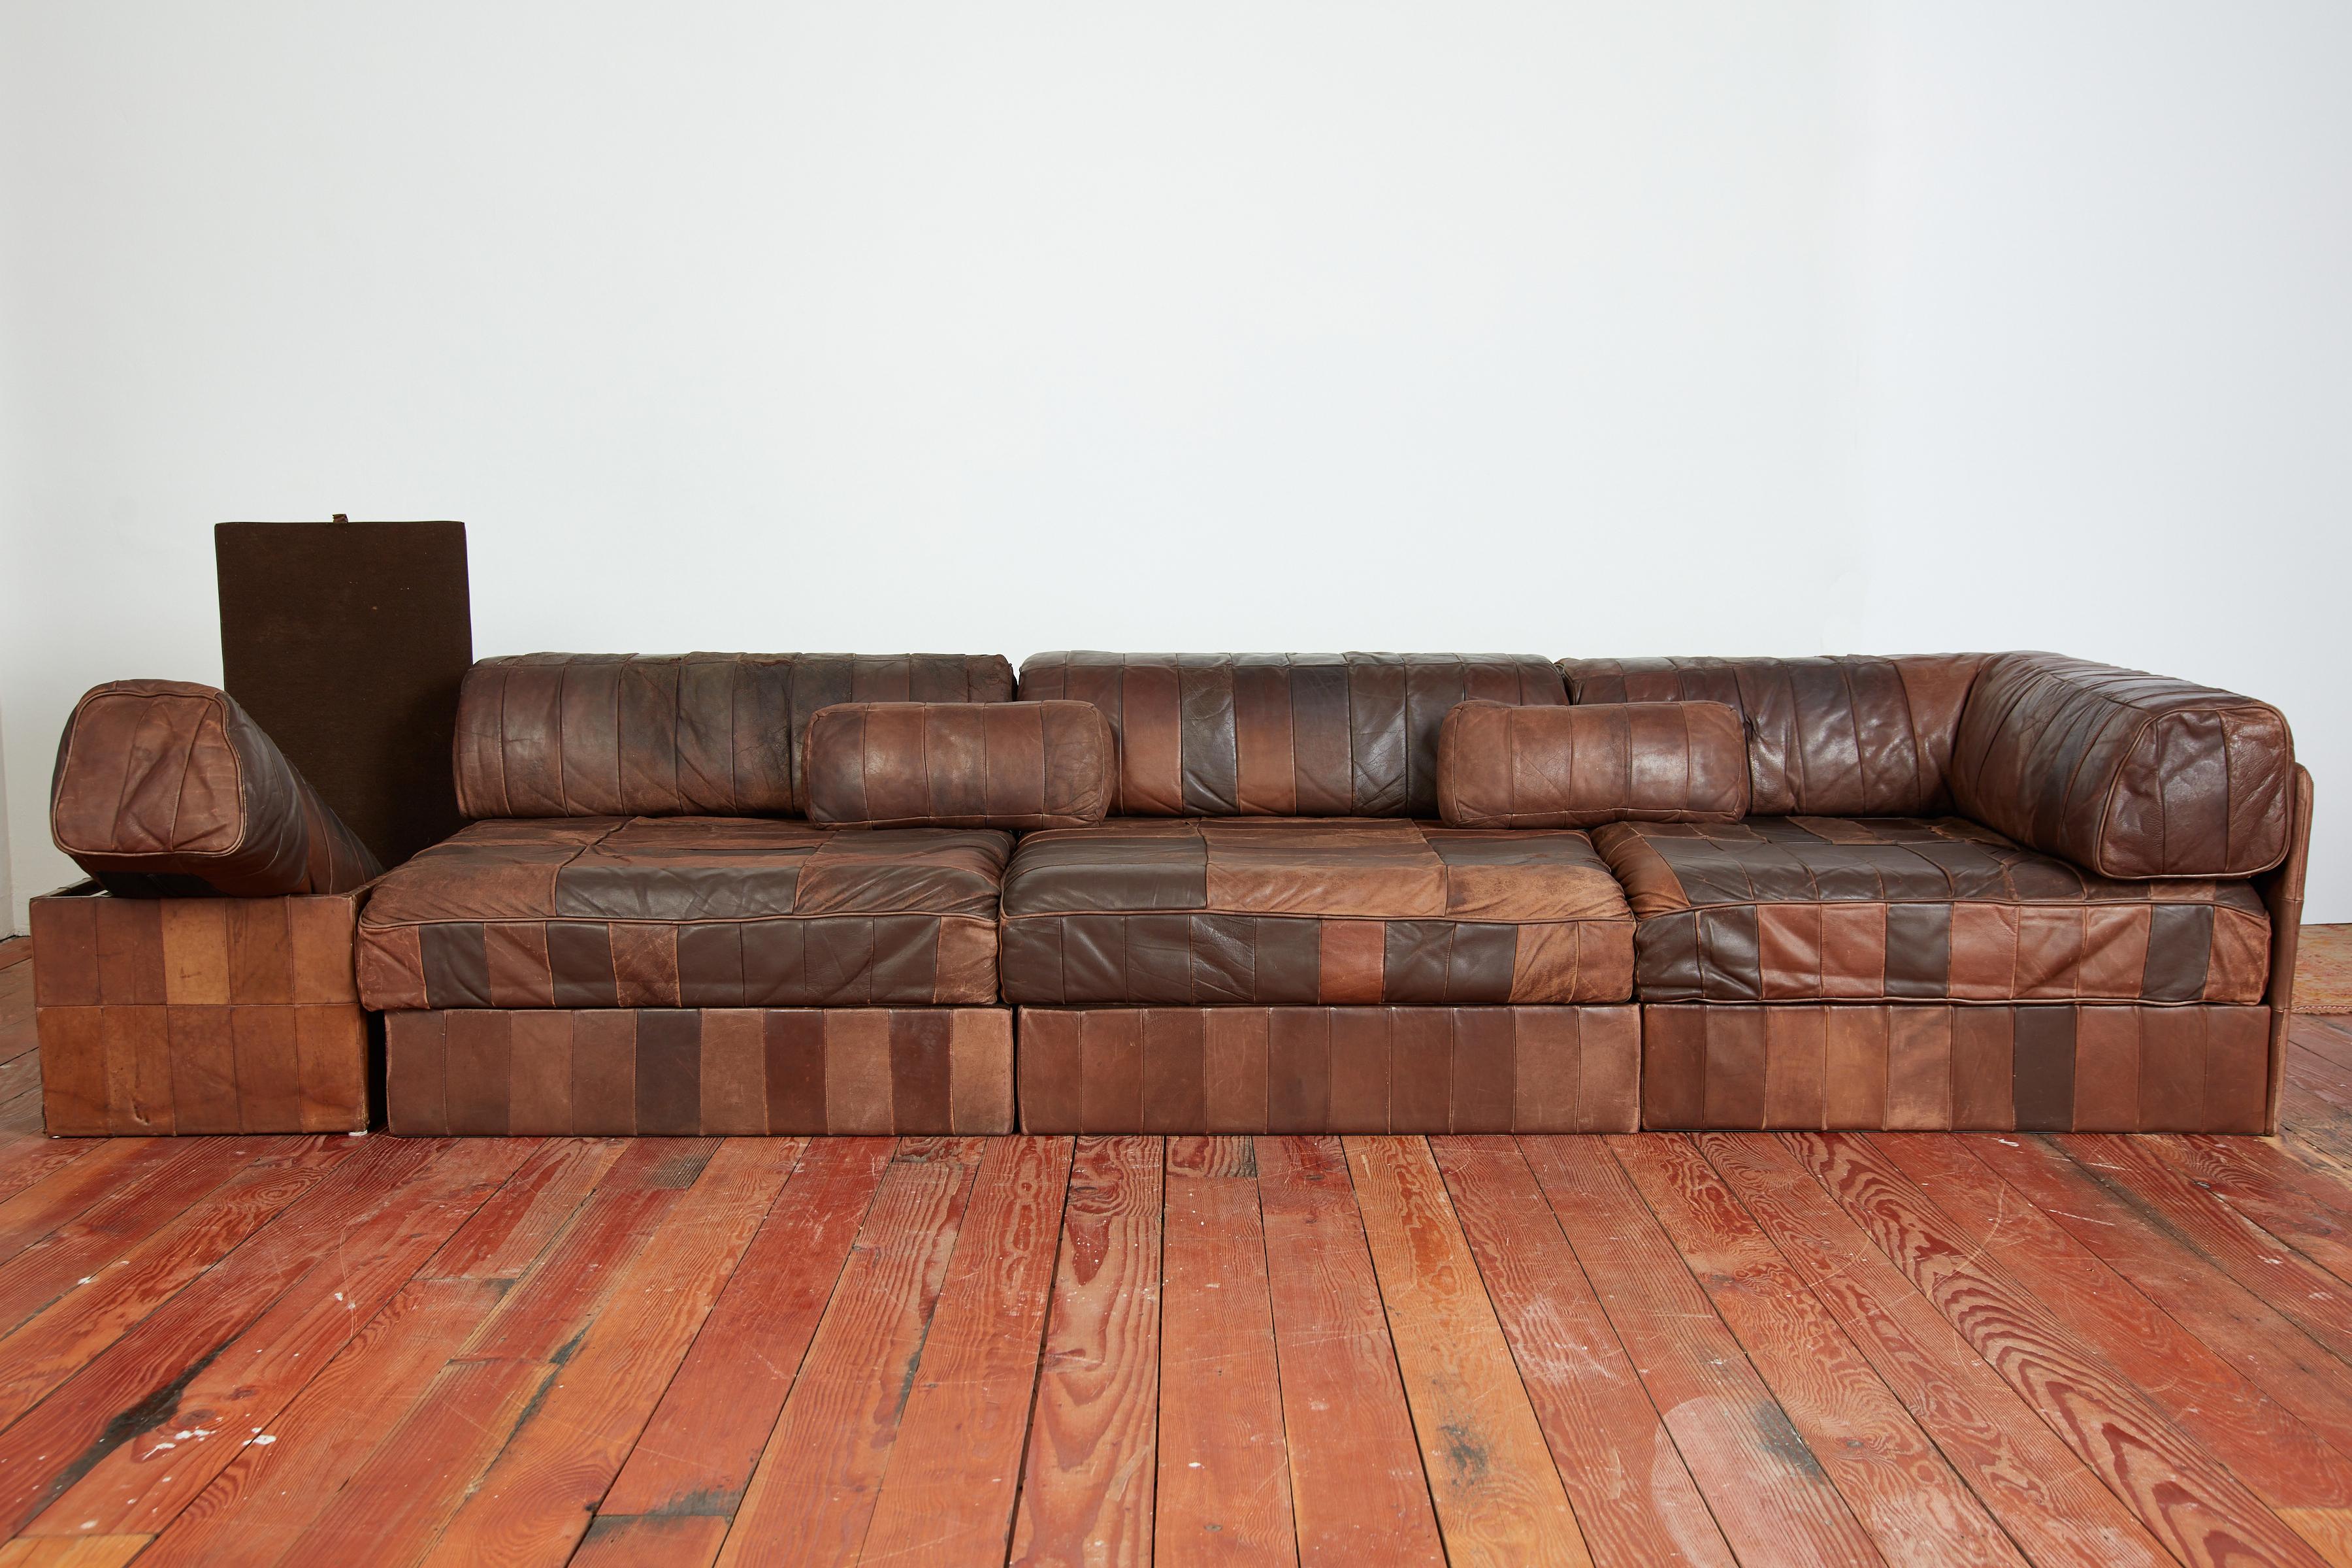 Leather patchwork De Sede modular sectional - Switzerland, 1970s
Original chocolate brown patchwork leather

Comprising of a corner section and two armless sections with removable backrests ( 24